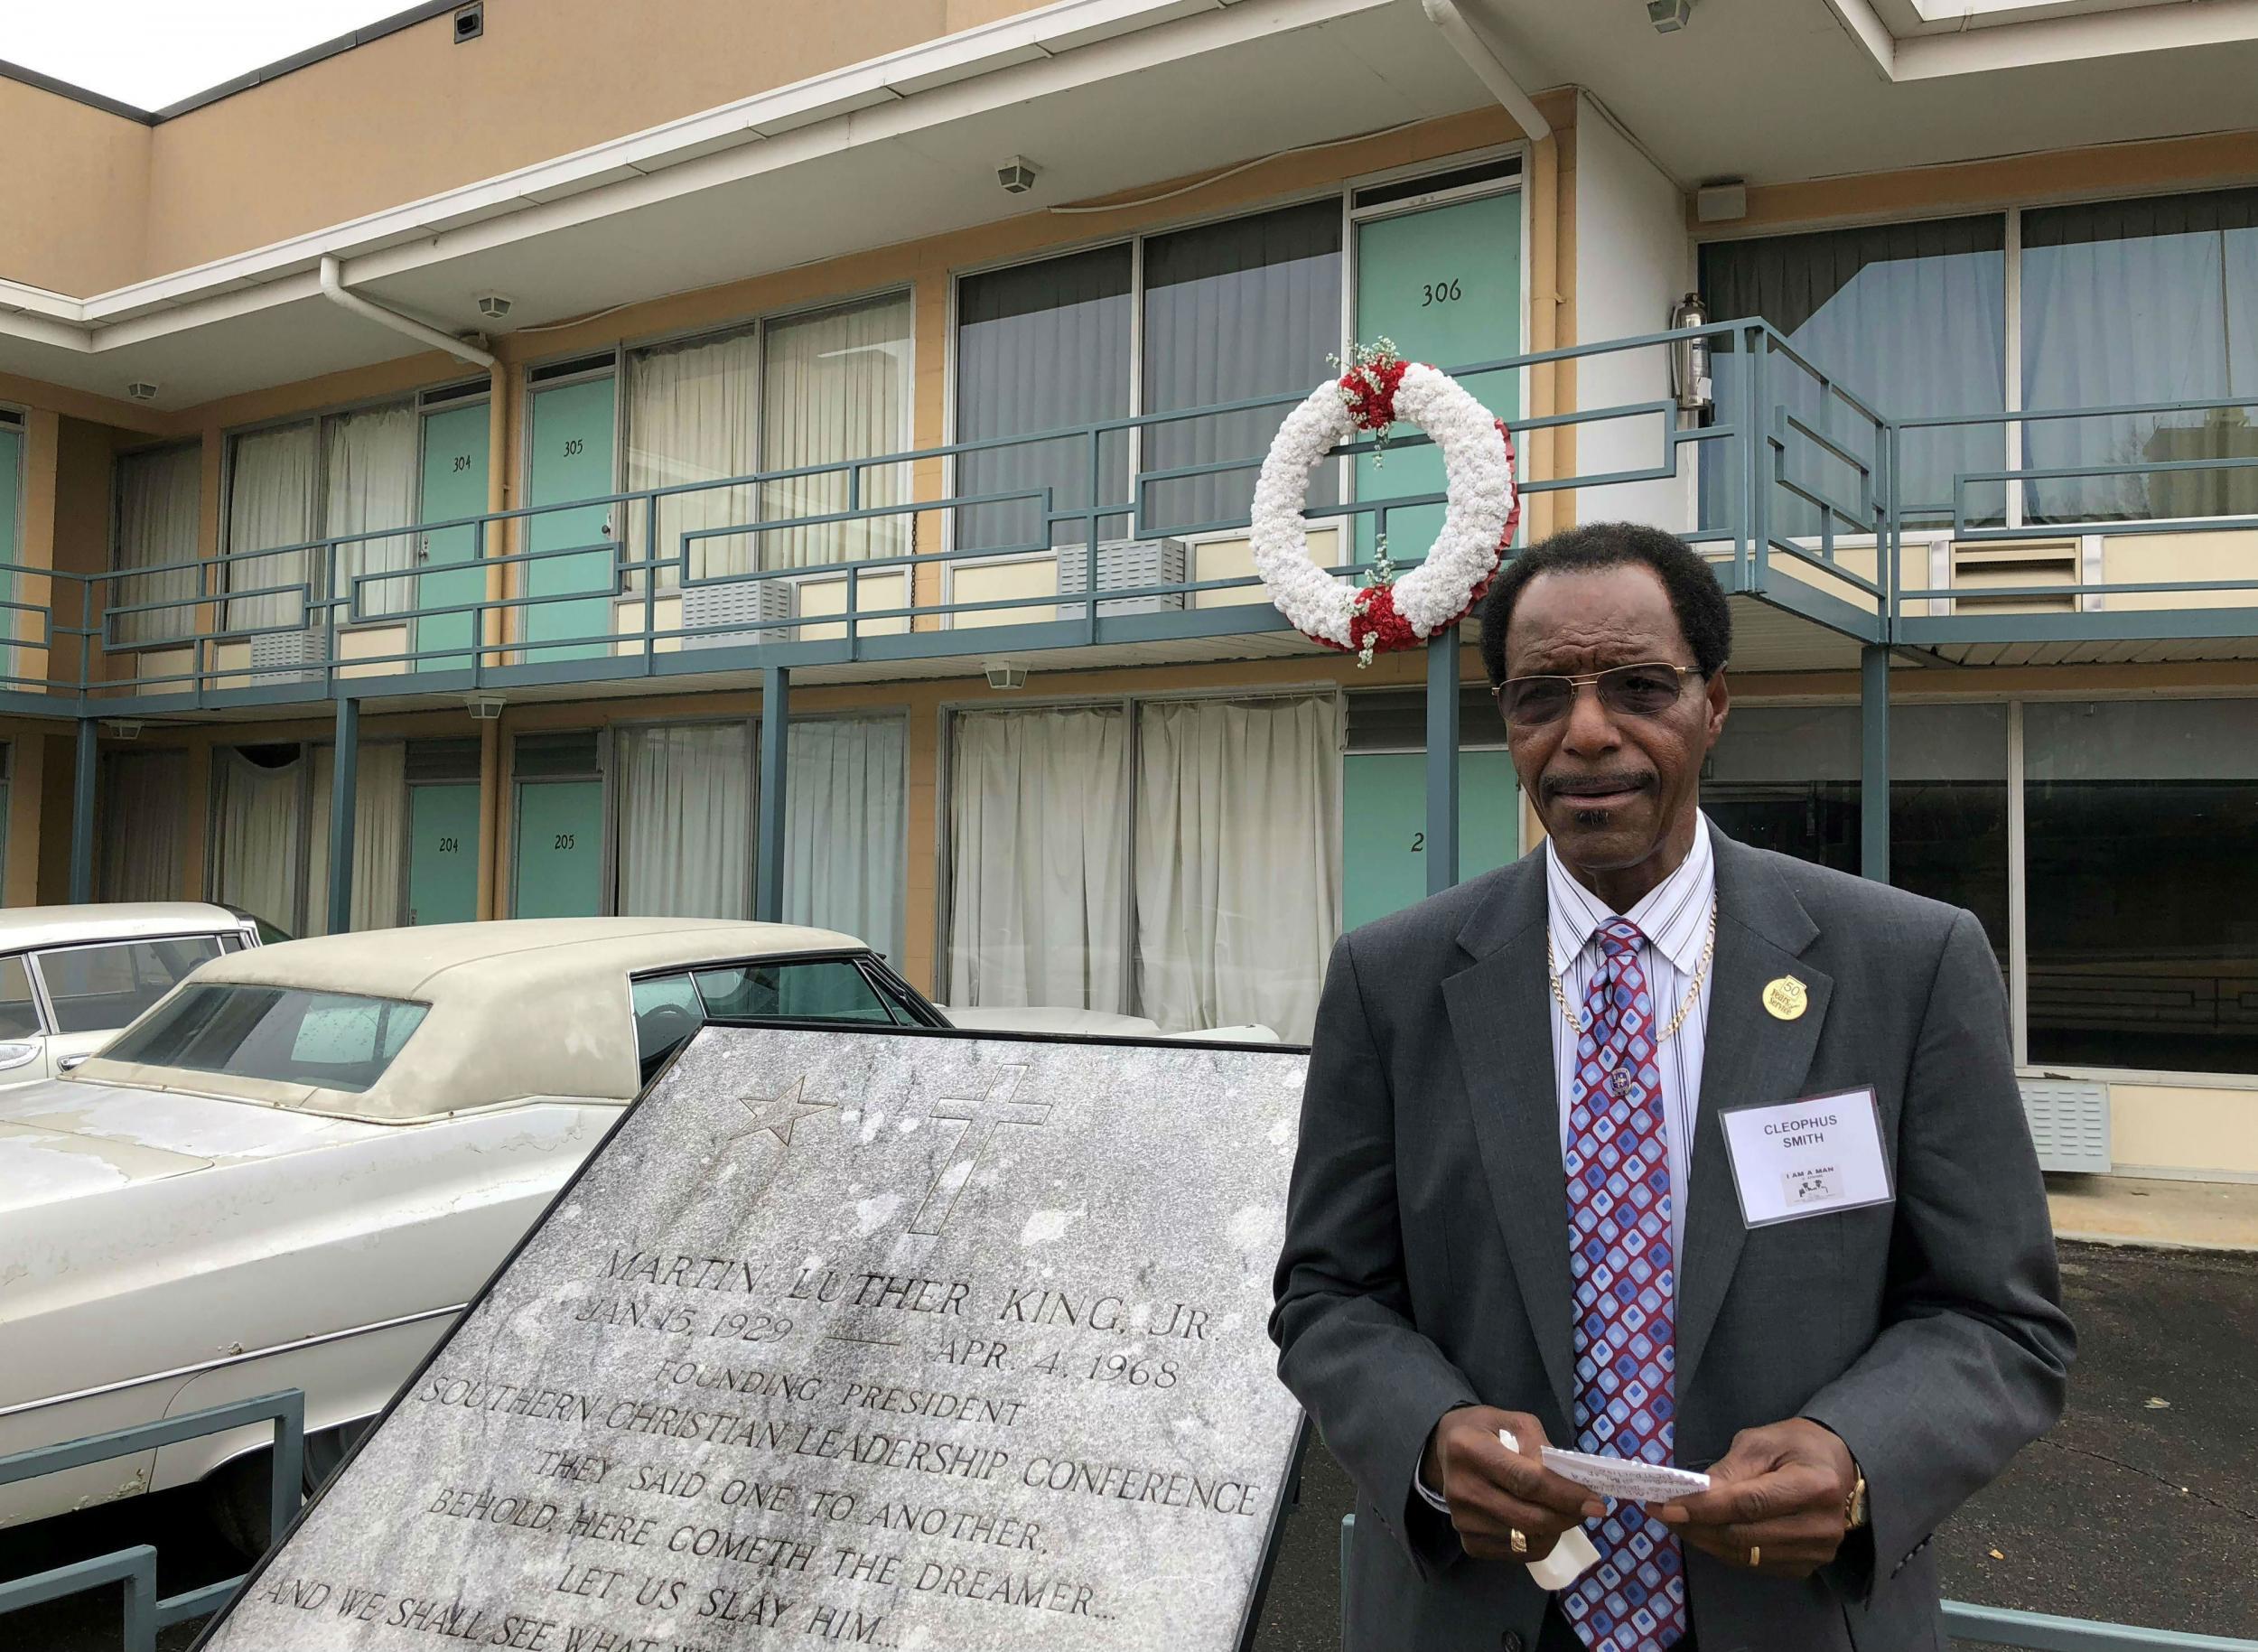 Cleophus Smith, who still works for the city’s sanitation department, at the Lorraine Motel where King was assassinated 50 years ago